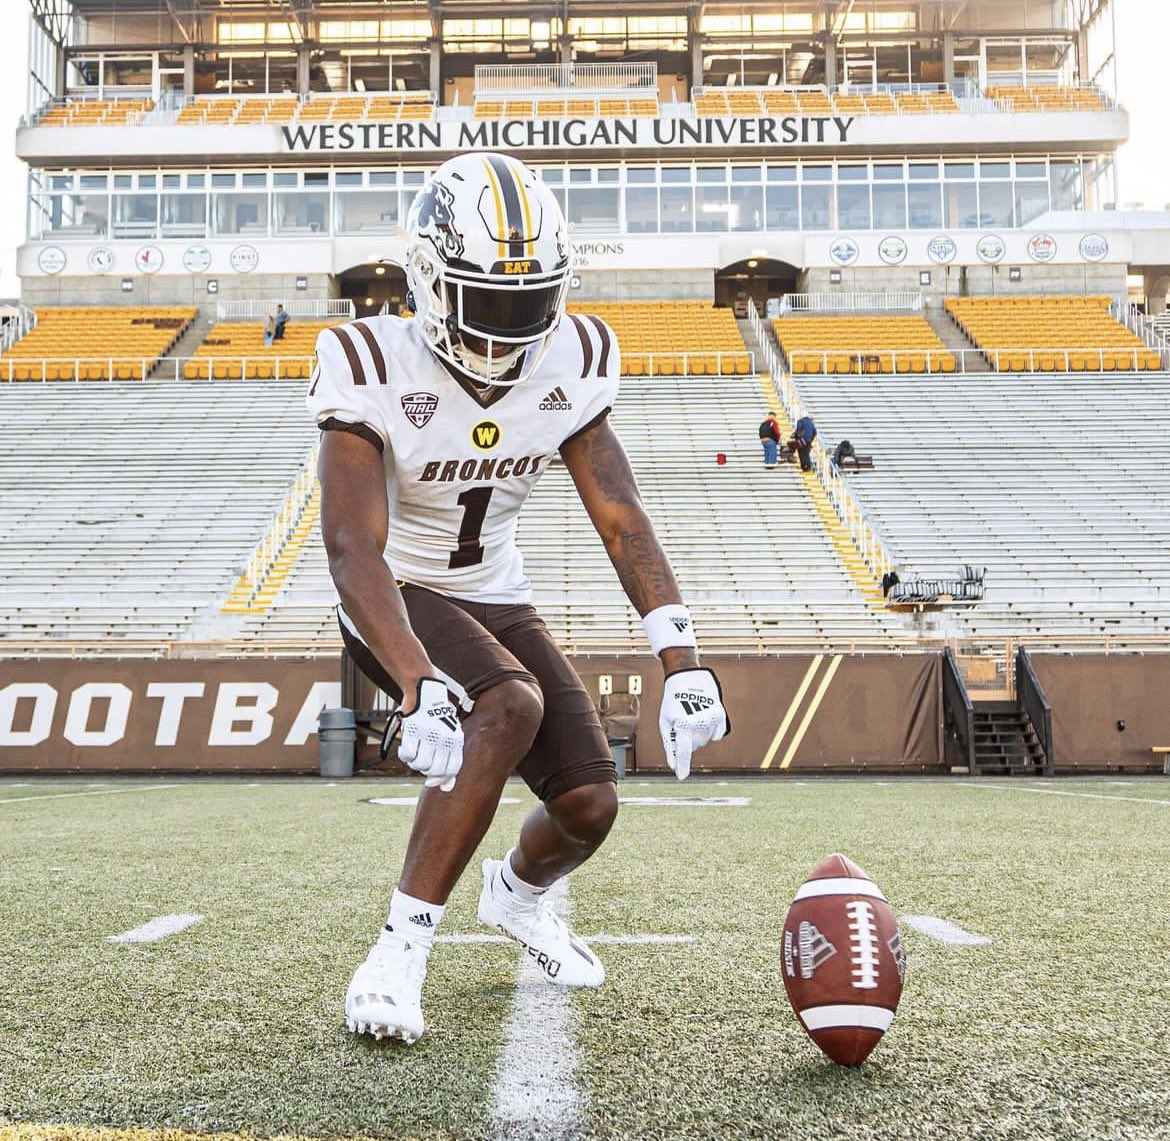 Blessed to receive an offer from Western Michigan University @coachsspence @MHS_Knights_FB @Coach_Davis3 @Coach_Mont70 @Nick_Ricks_ @JackSwain100 @CoachQ954 @TheCribSouthFLA @larryblustein